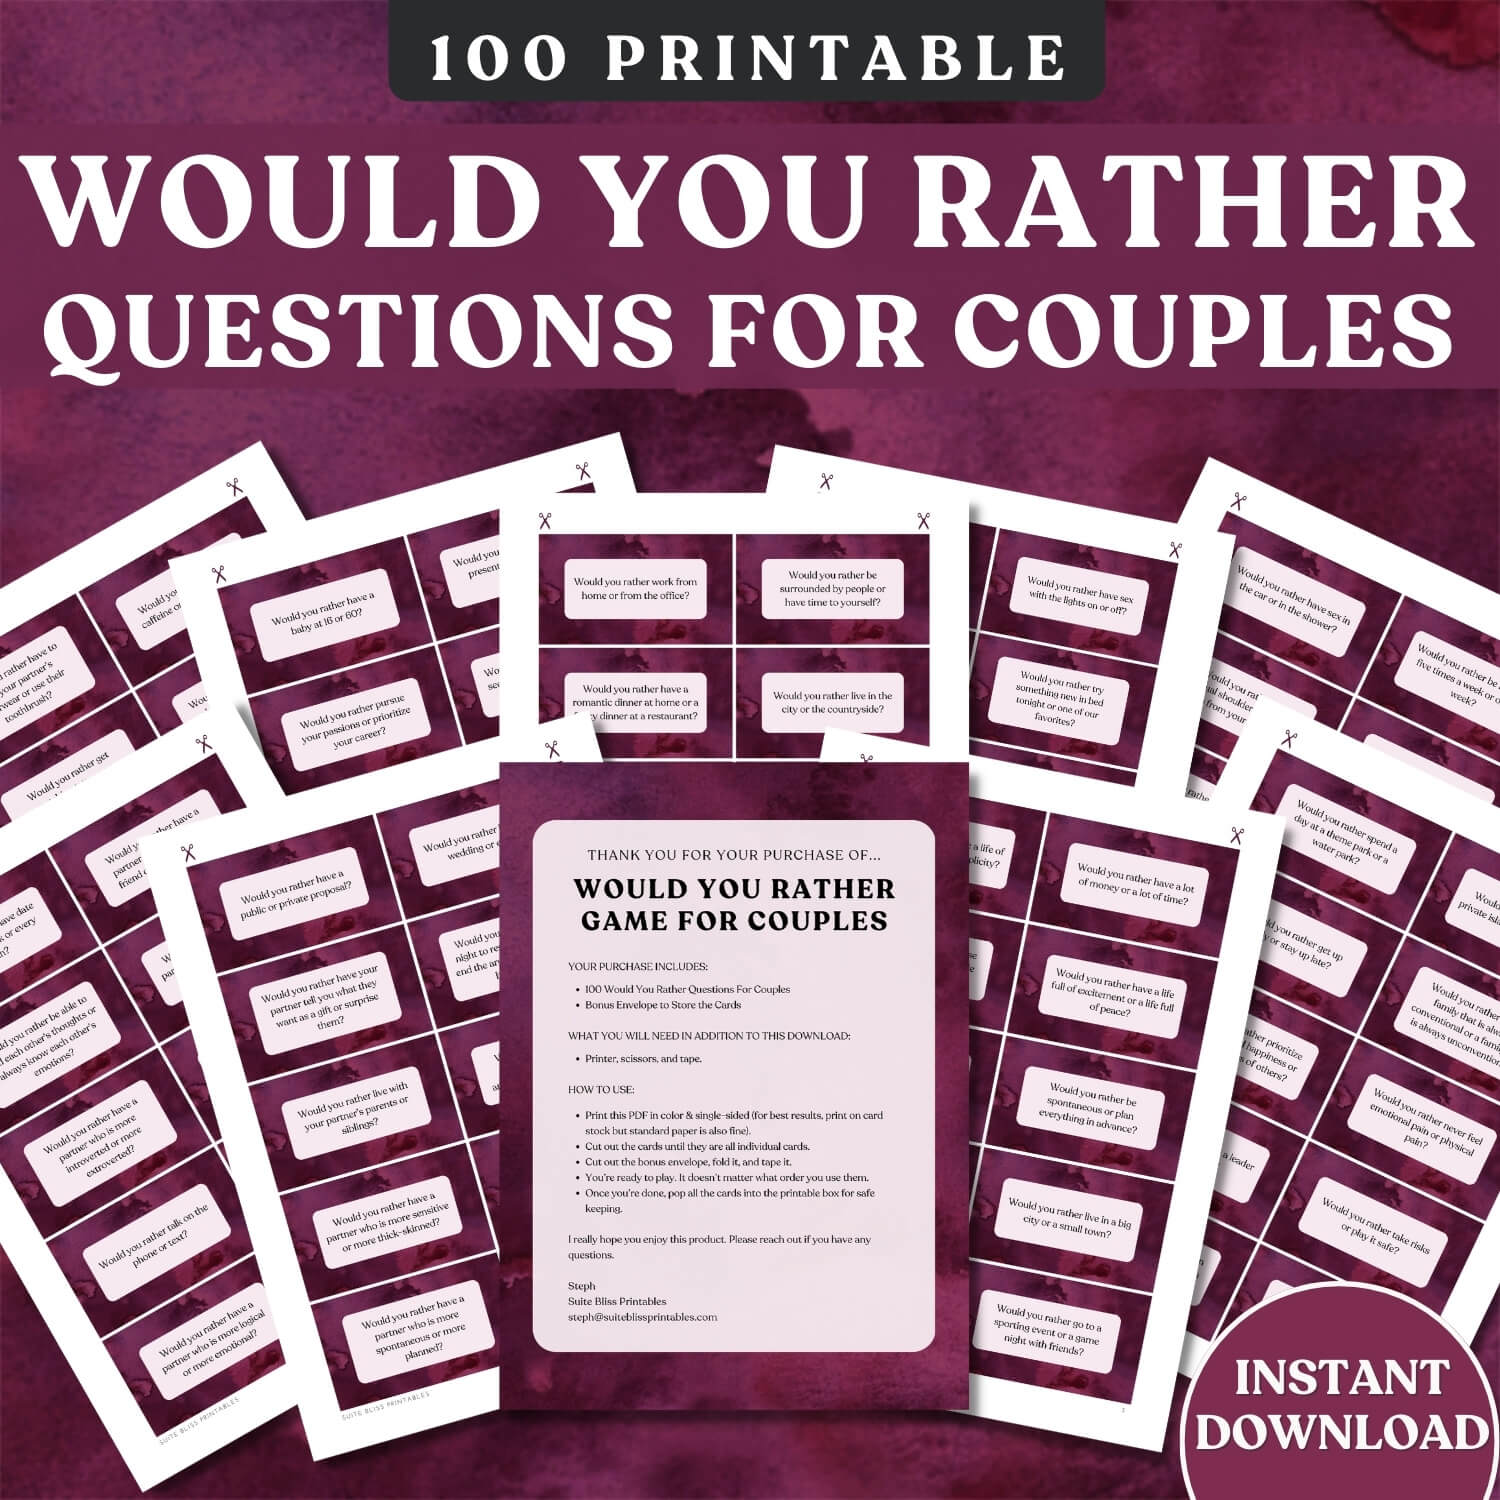 Would you rather questions for couples